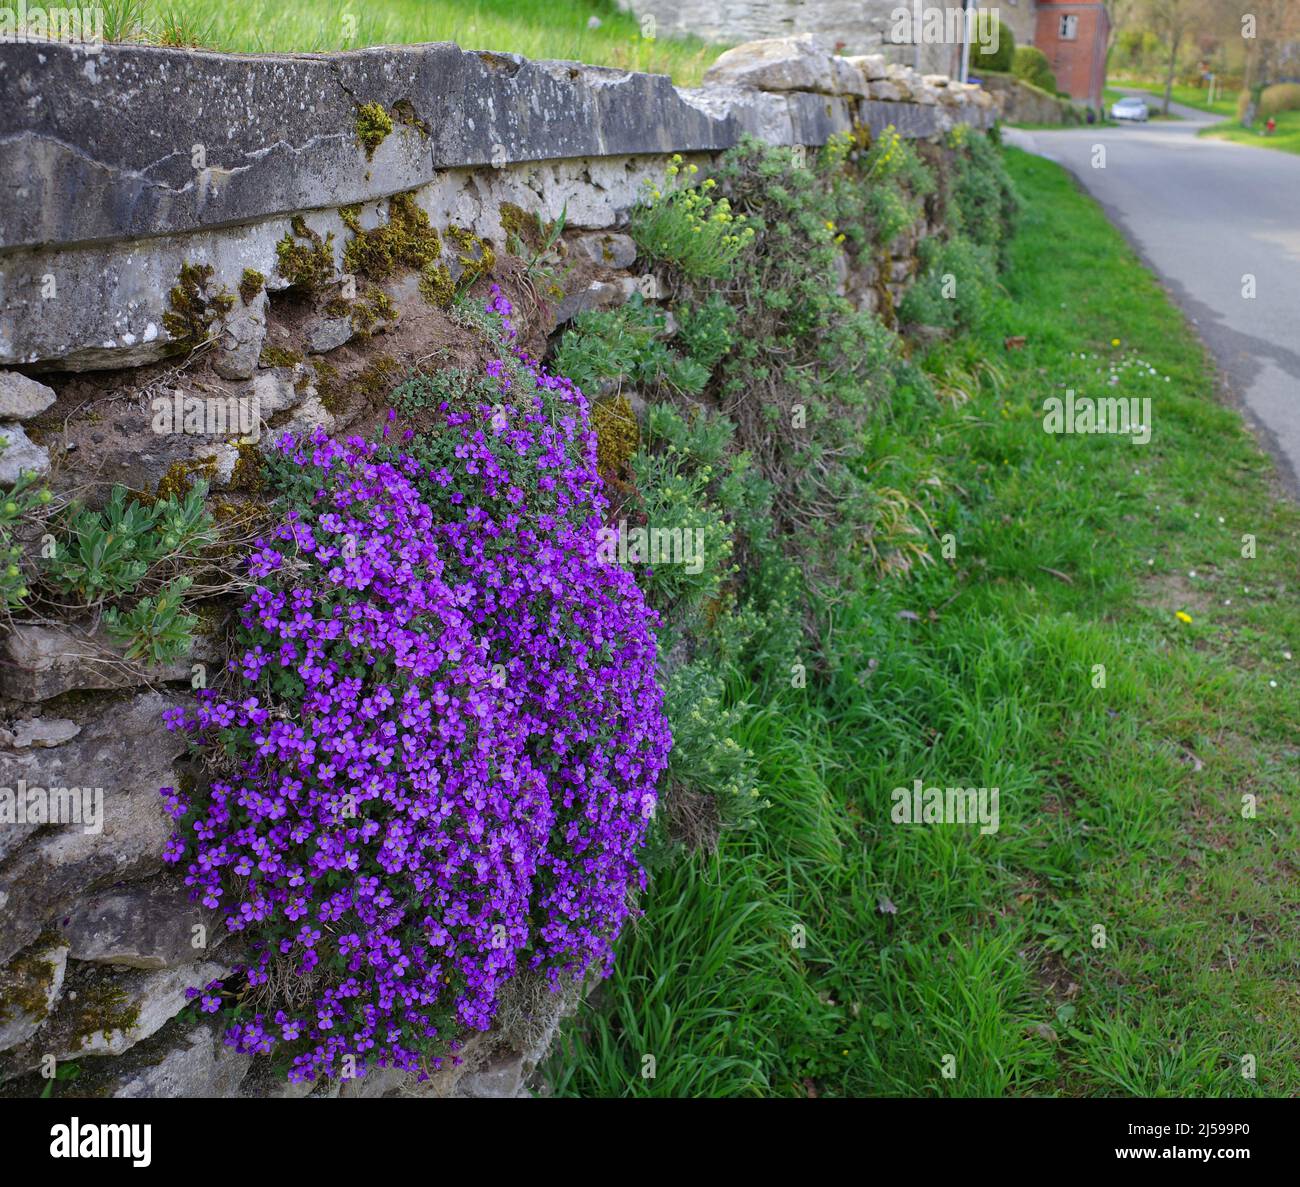 Aubrieta or Aubretia is part of the cabbage family Brassicaceae. It has small violet, pink, or white flowers, and it inhabits rocks and banks. Stock Photo